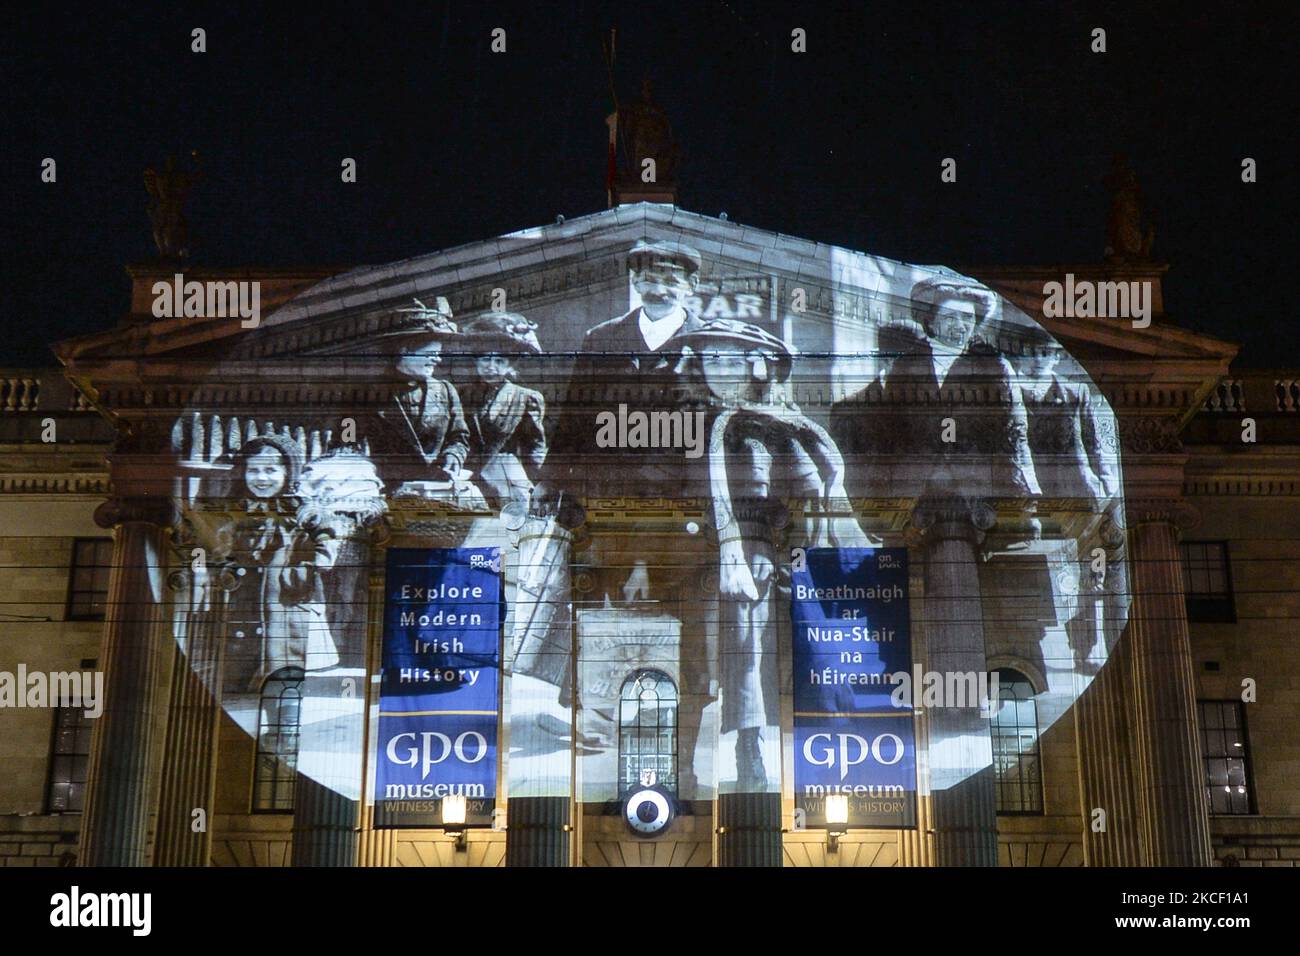 Archival images of Irish immigrants to America projected on the GPO facade in Dublin, as part of the Herstory's new Parallel Peace Project in Dublin launched on World Day for Cultural Diversity for Dialogue and Development. Syrian, Somali, Kenyan, Libyan activists took part in a project in Dublin that tells the story of women and girls on the island of Ireland whose lives have been hit by wars and social conflicts. On Thursday, 20 May 2021, in Dublin, Ireland. (Photo by Artur Widak/NurPhoto) Stock Photo